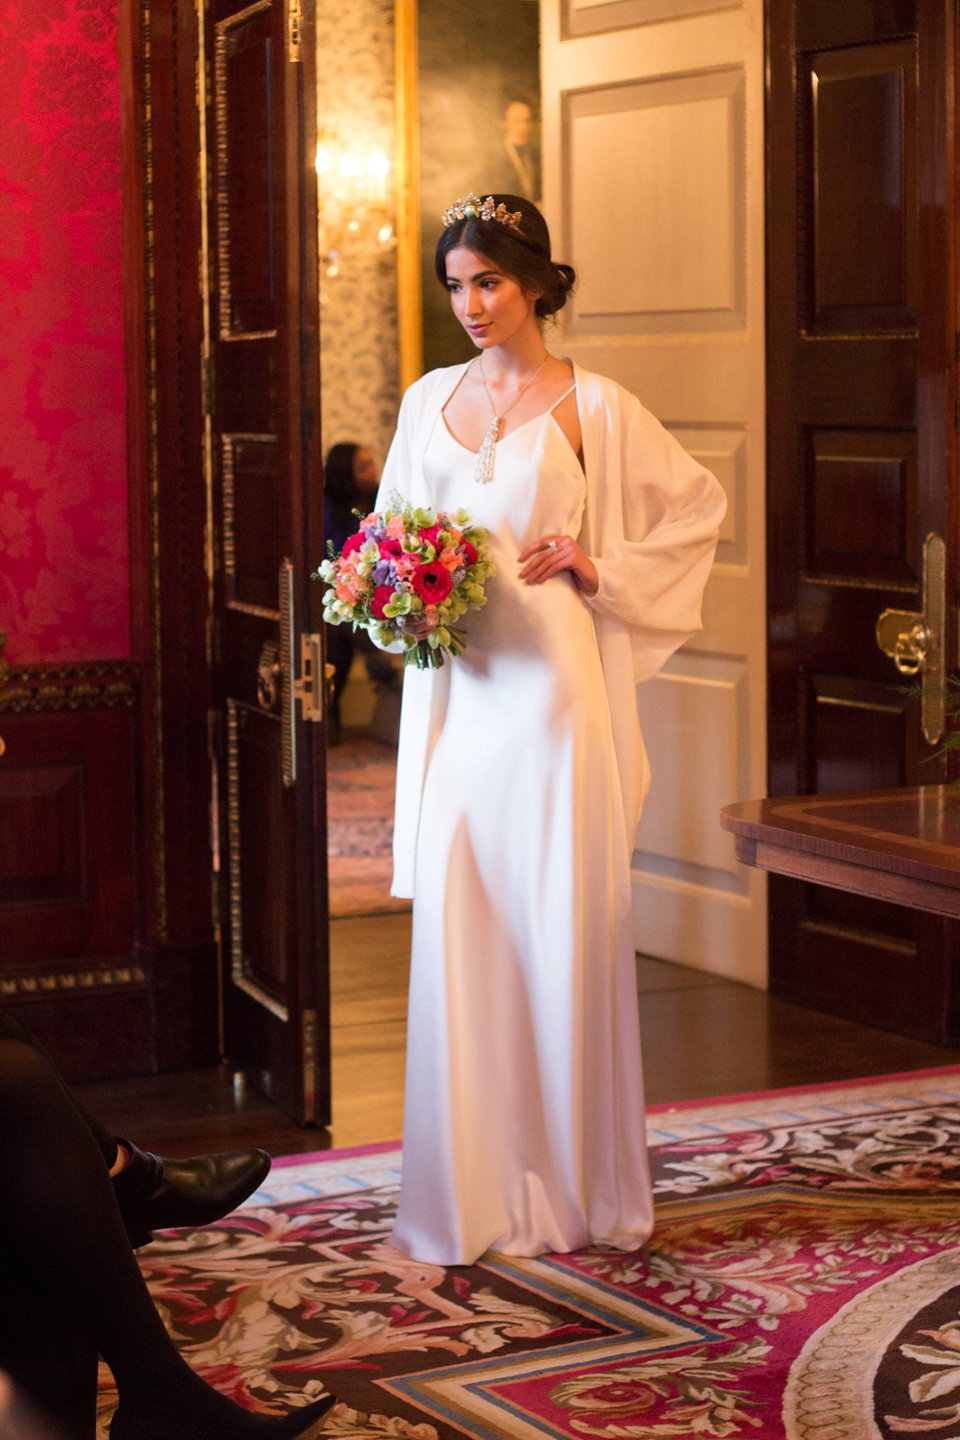 The new 2017 collection by Halfpenny London - presented at The Ritz, in association with Brides Magazine.